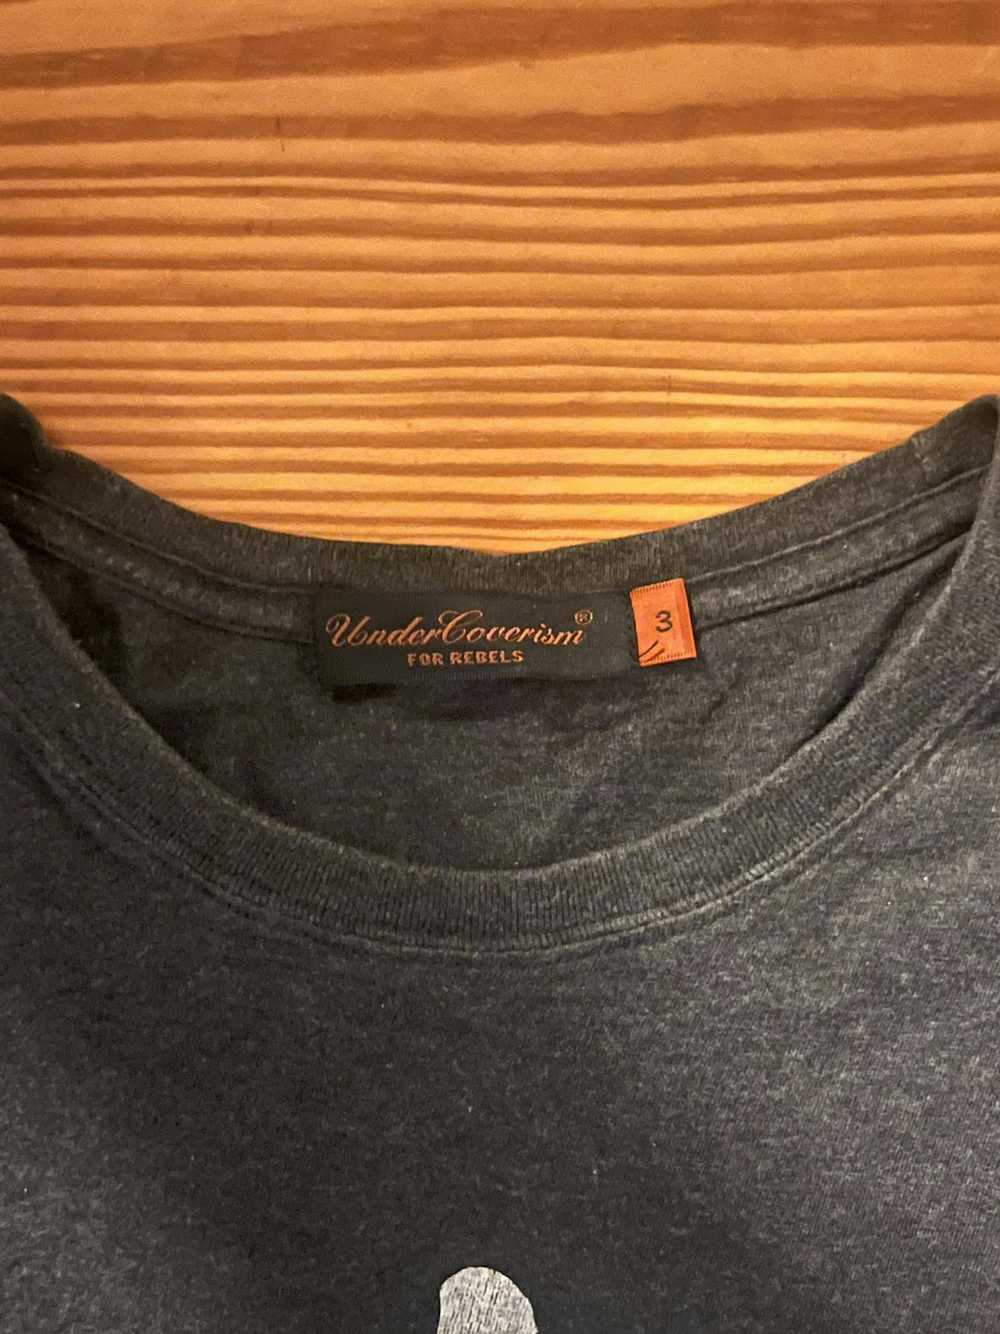 Undercover Undercover apple fang tee - image 3